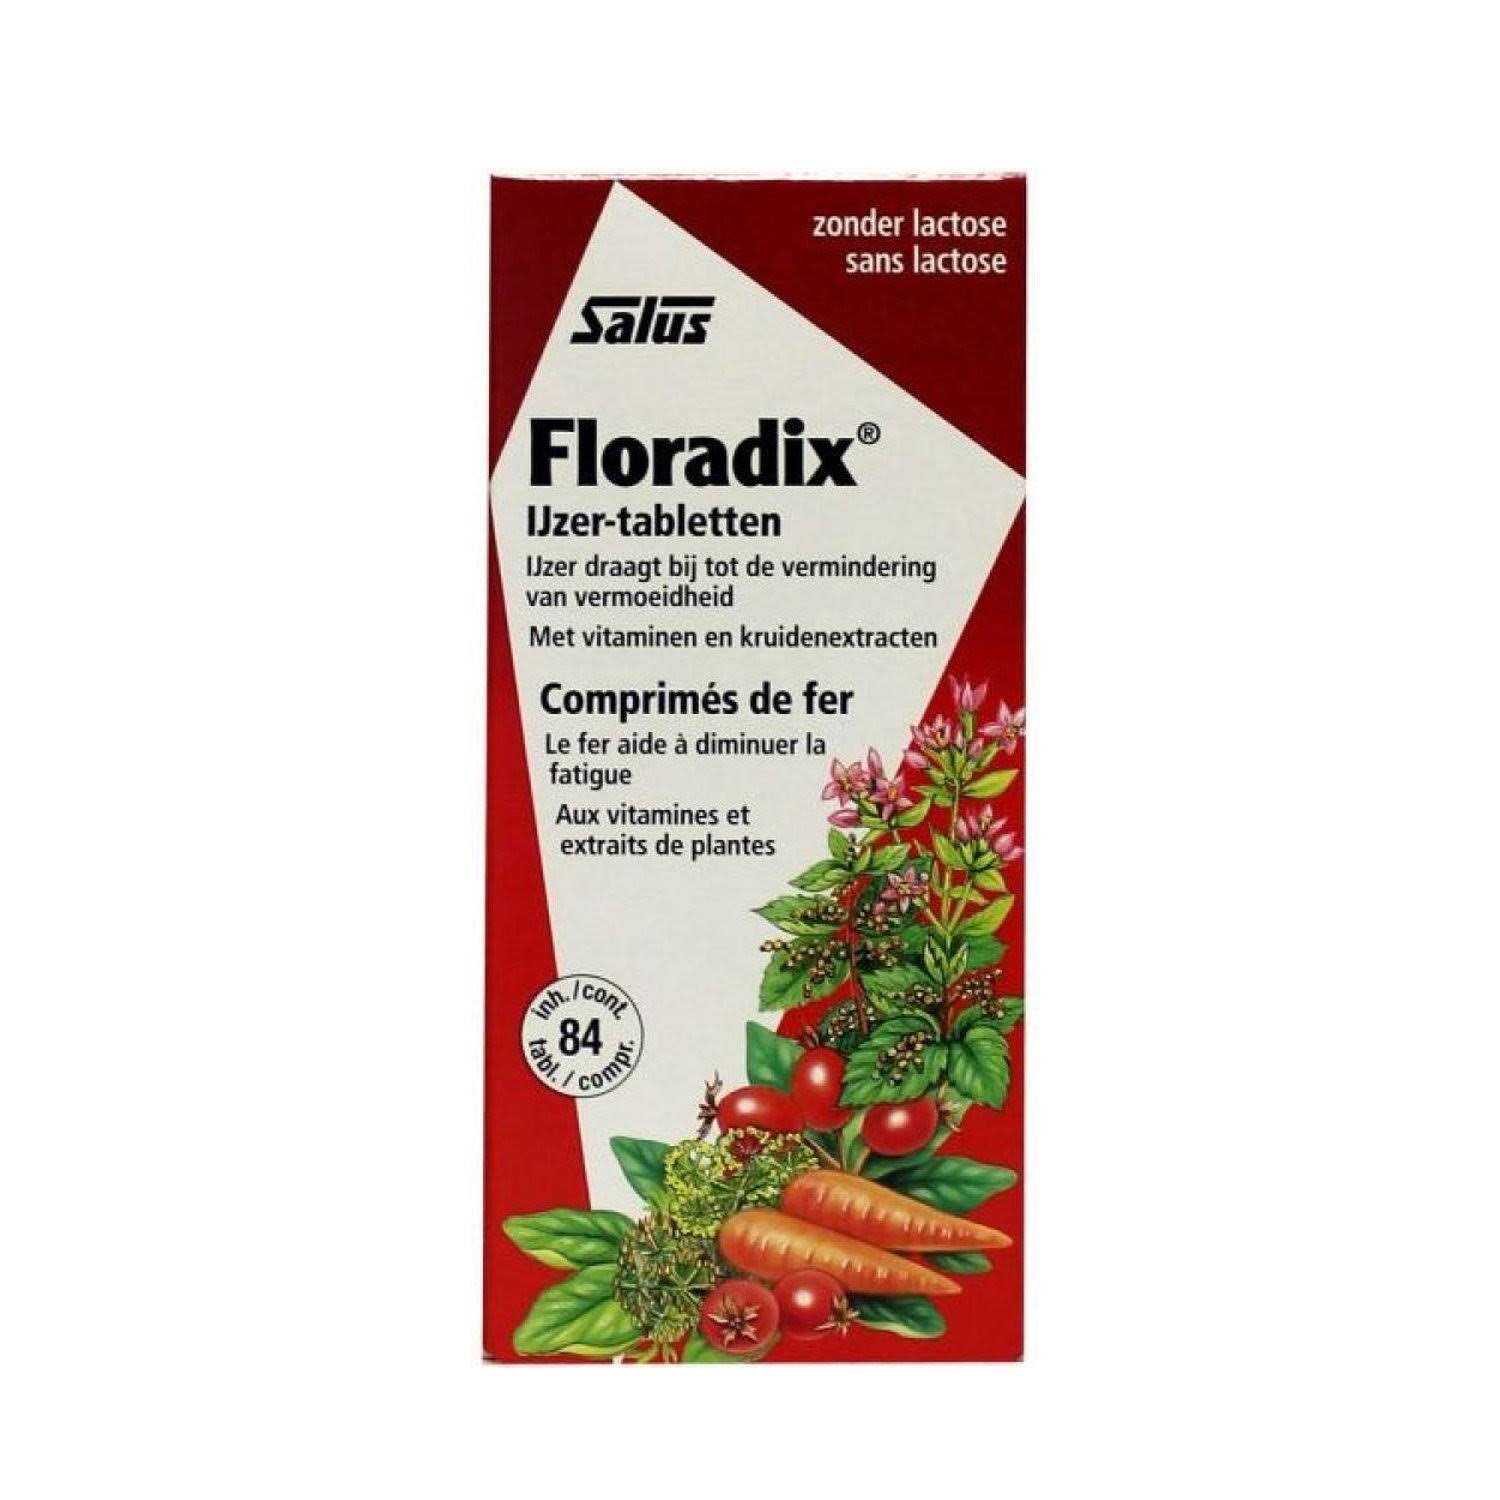 Floradix Iron and Vitamin Tablets - 84ct